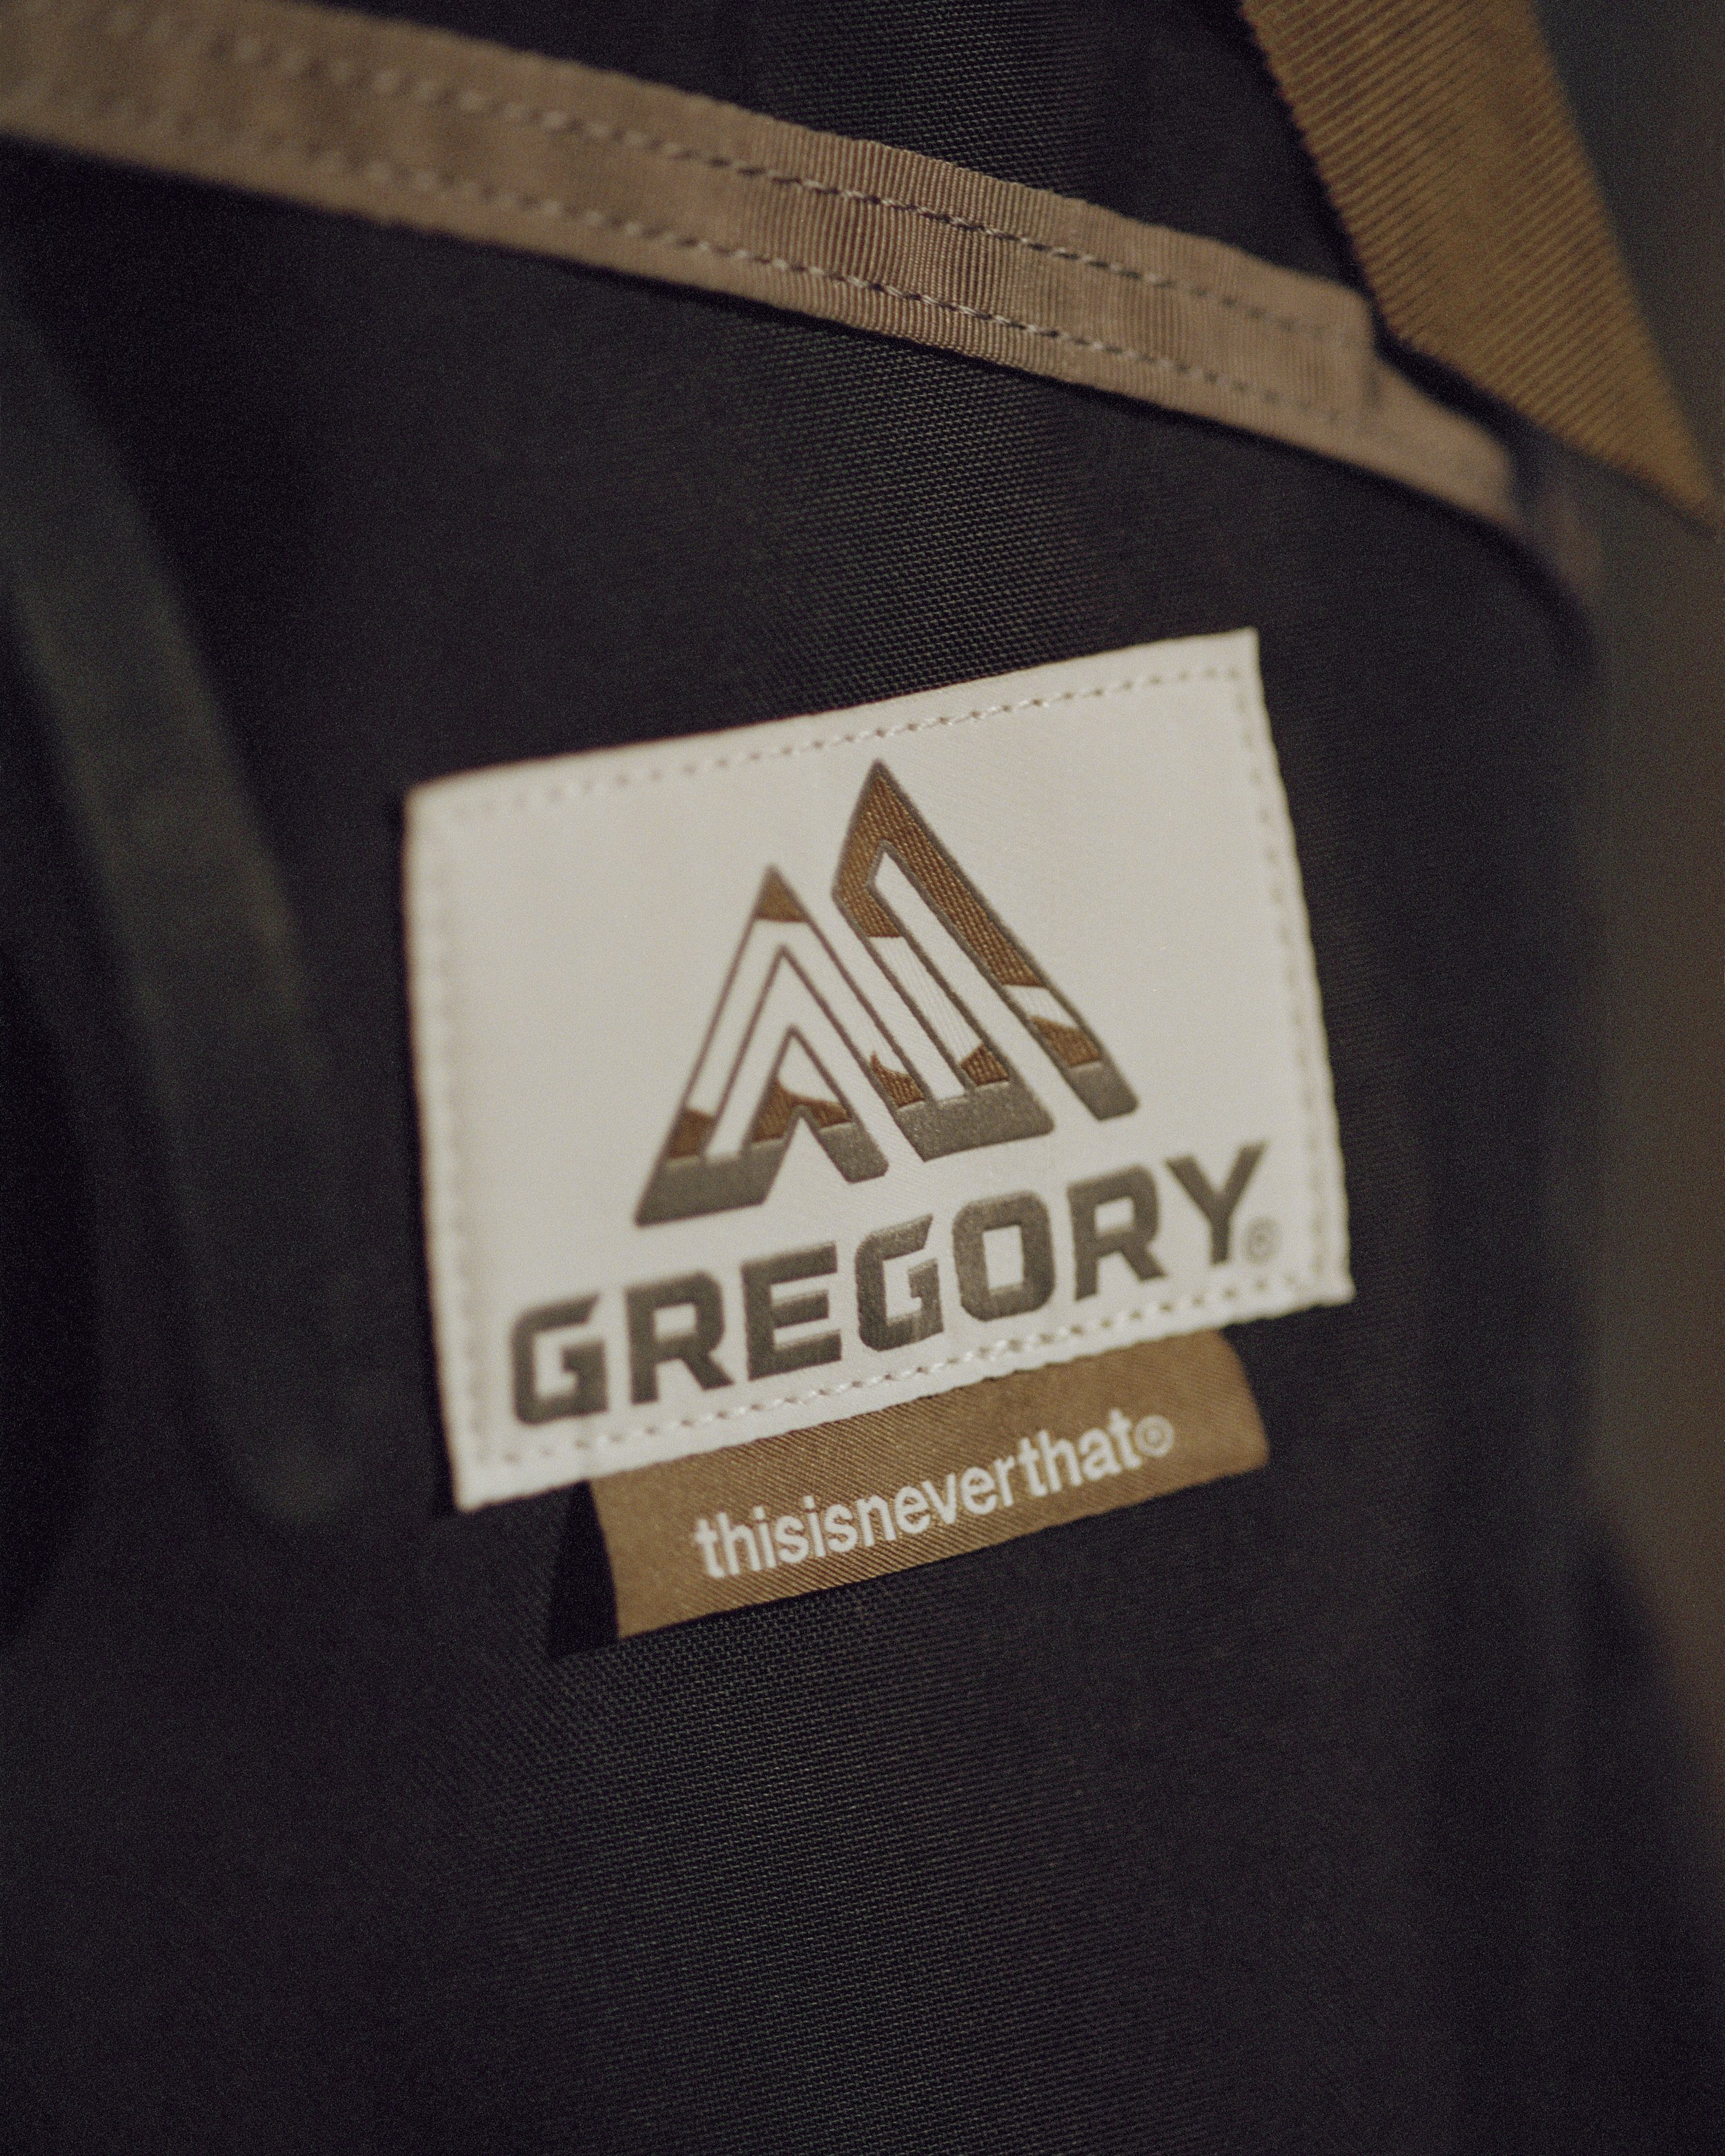 thisisneverthat x Gregory Capsule Release